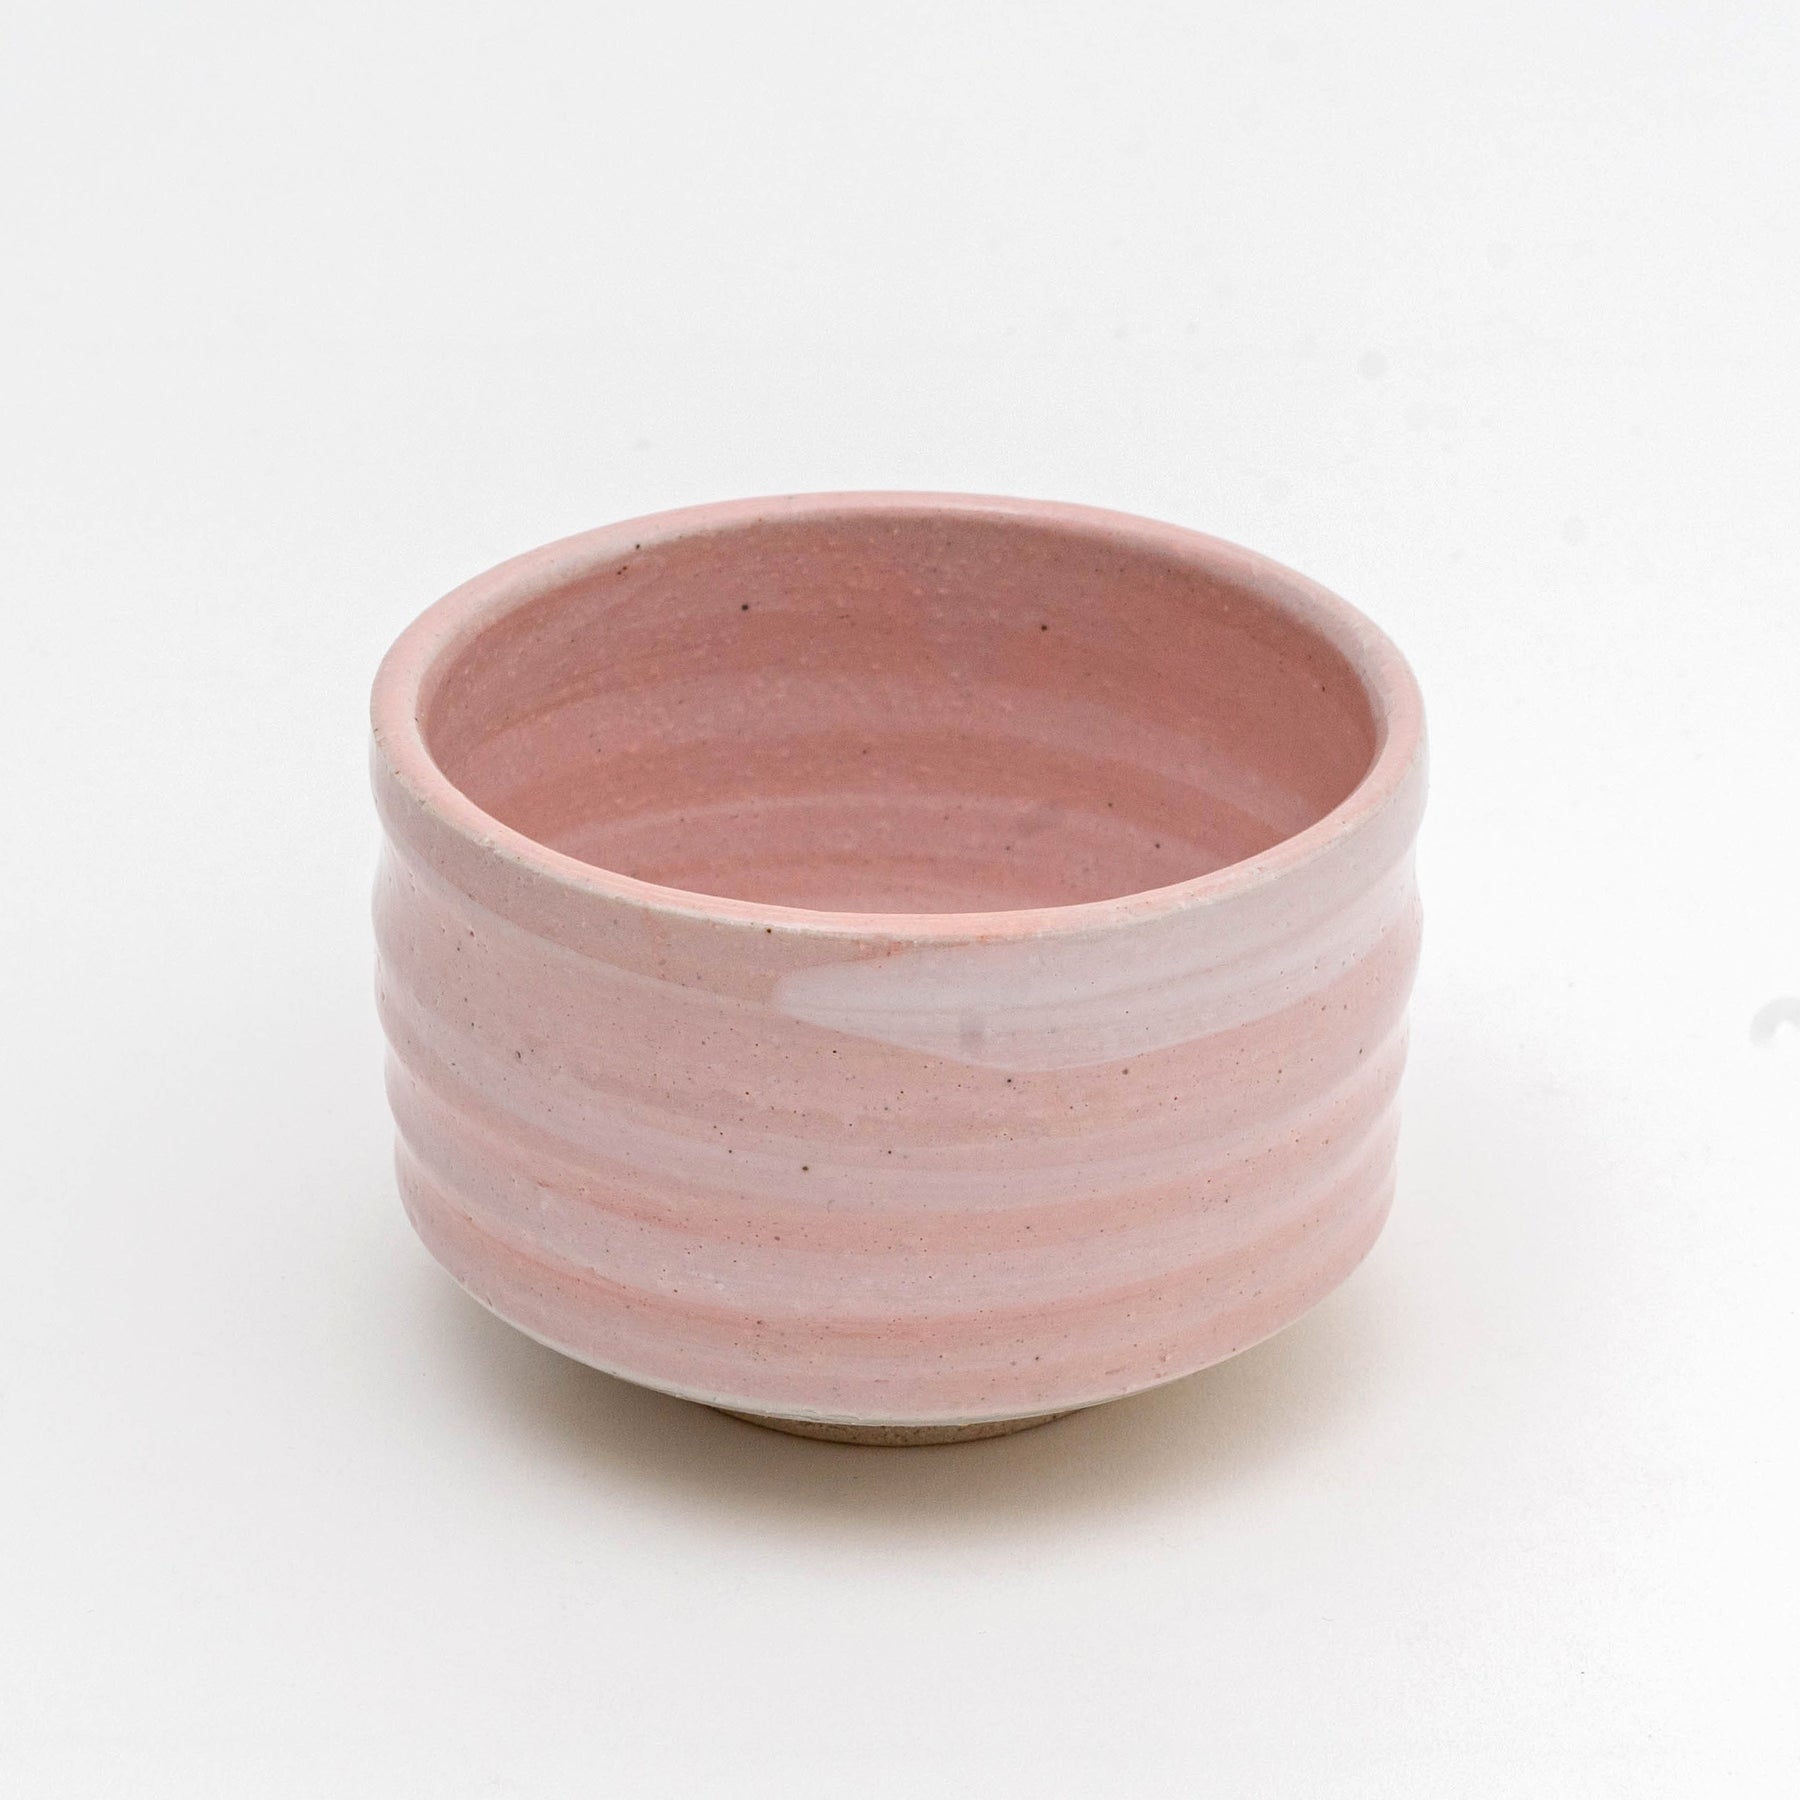 Authentic 17.5 oz Pottery Matcha Tea Cup Chubby Body Pink